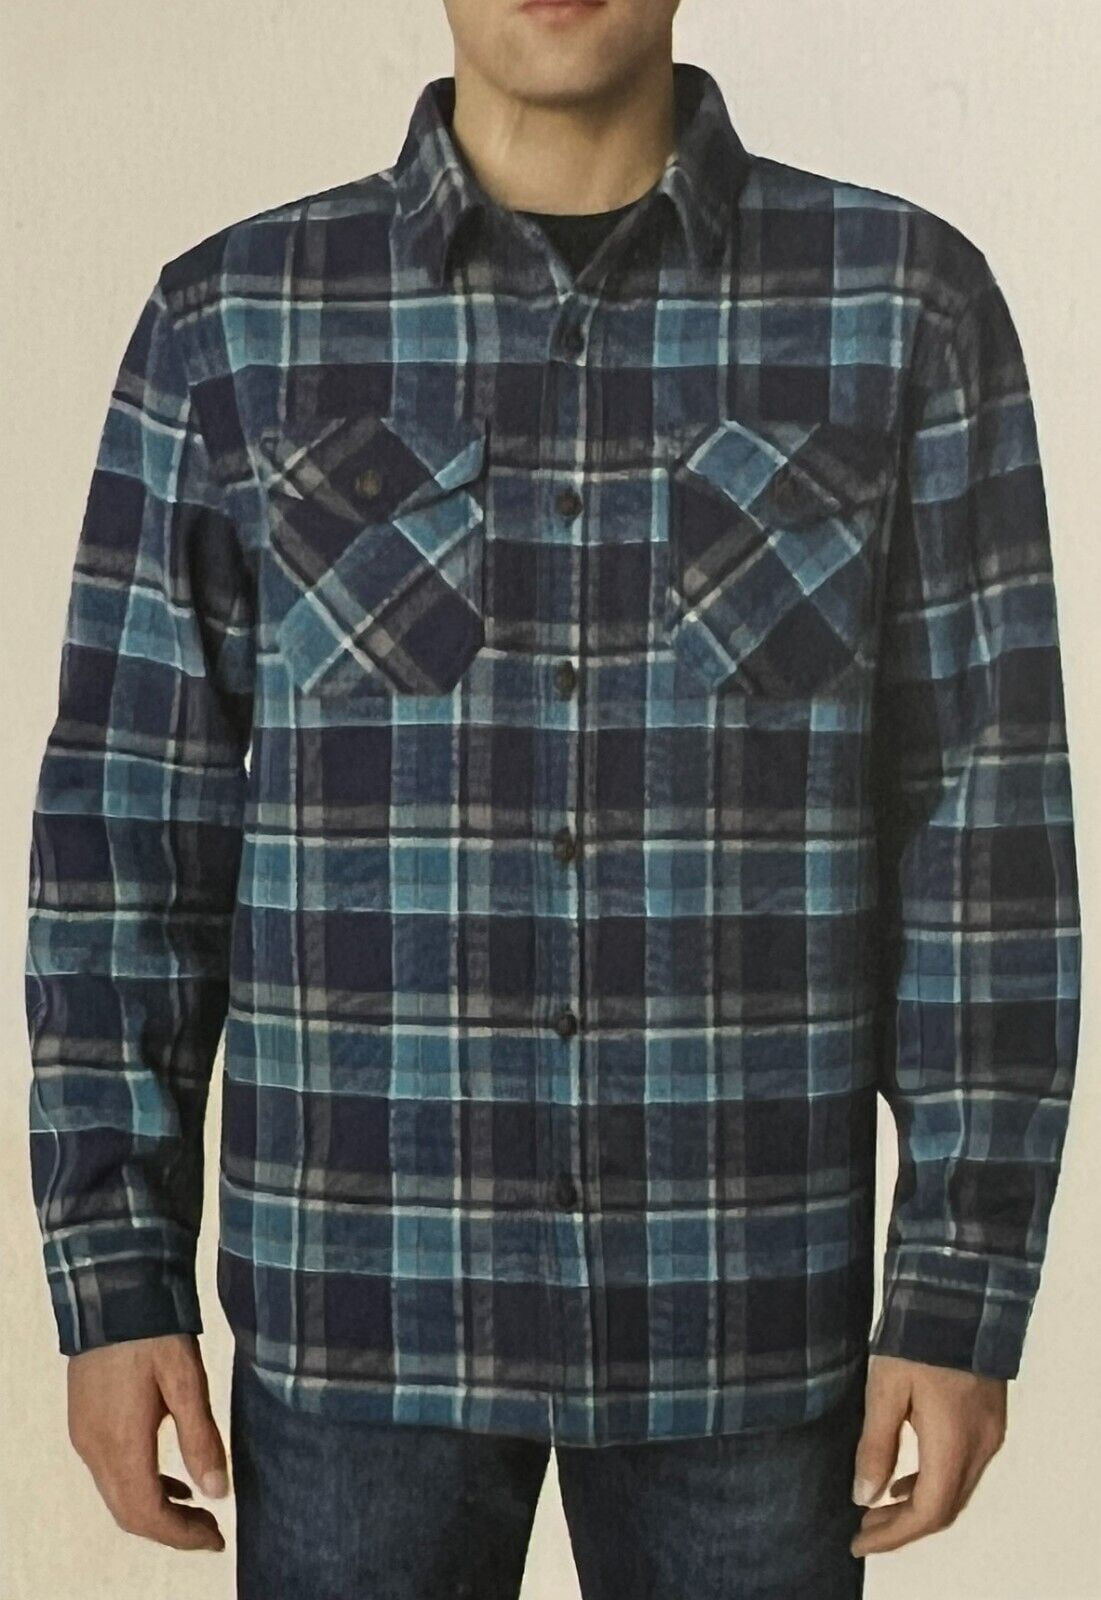 Lee Valley Lined Flannel Shirt Men’s Blue Navy Check - 2XL